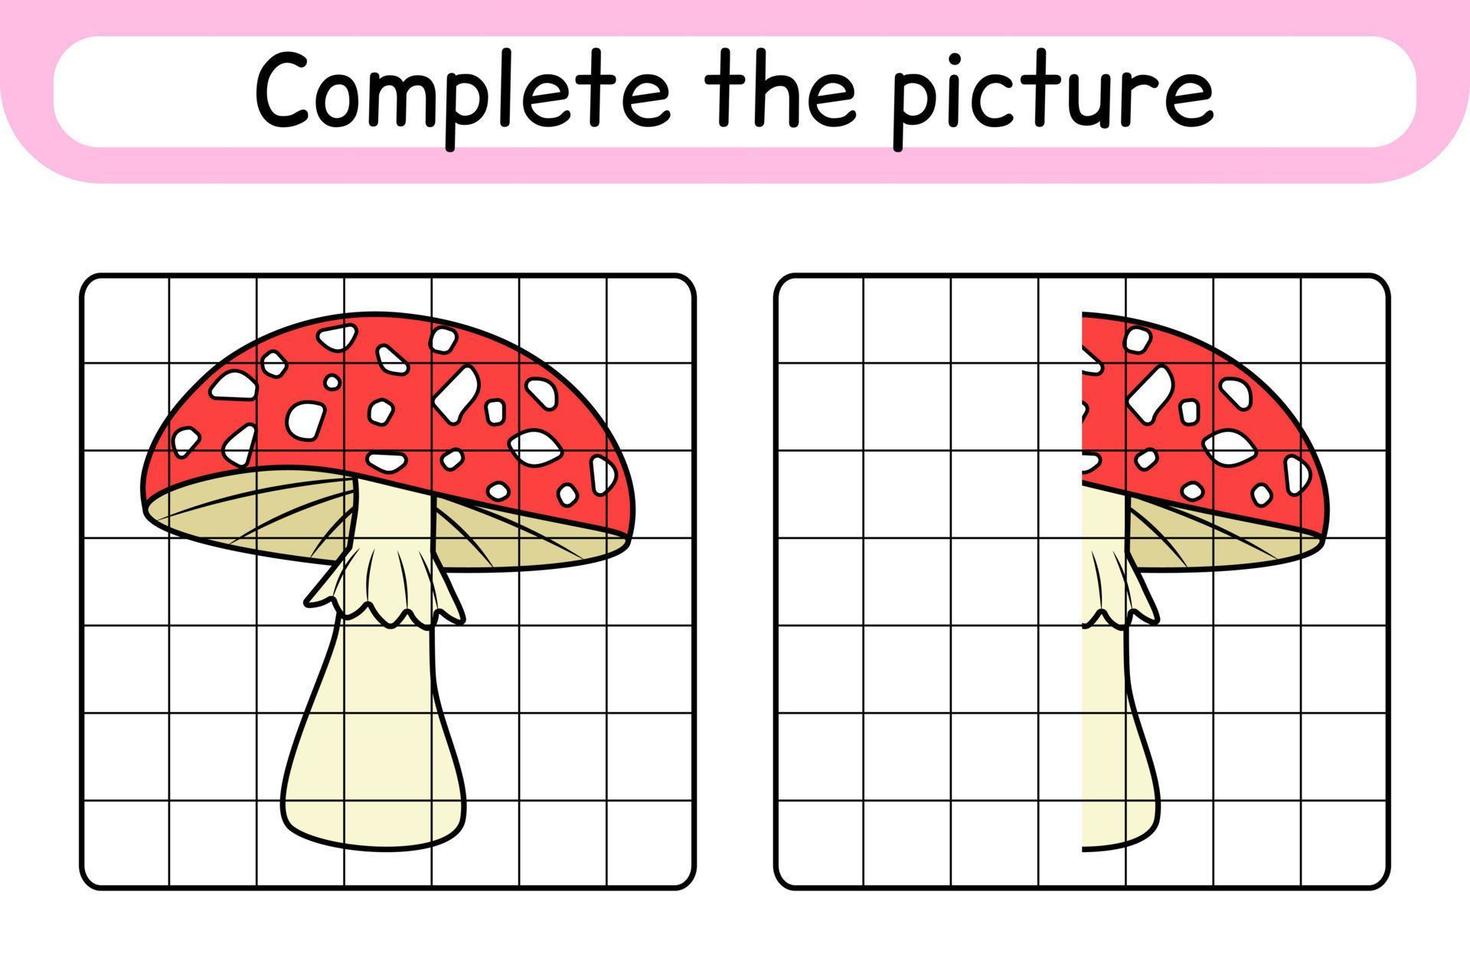 Complete the picture mushroom amanita. Copy the picture and color. Finish the image. Coloring book. Educational drawing exercise game for children vector